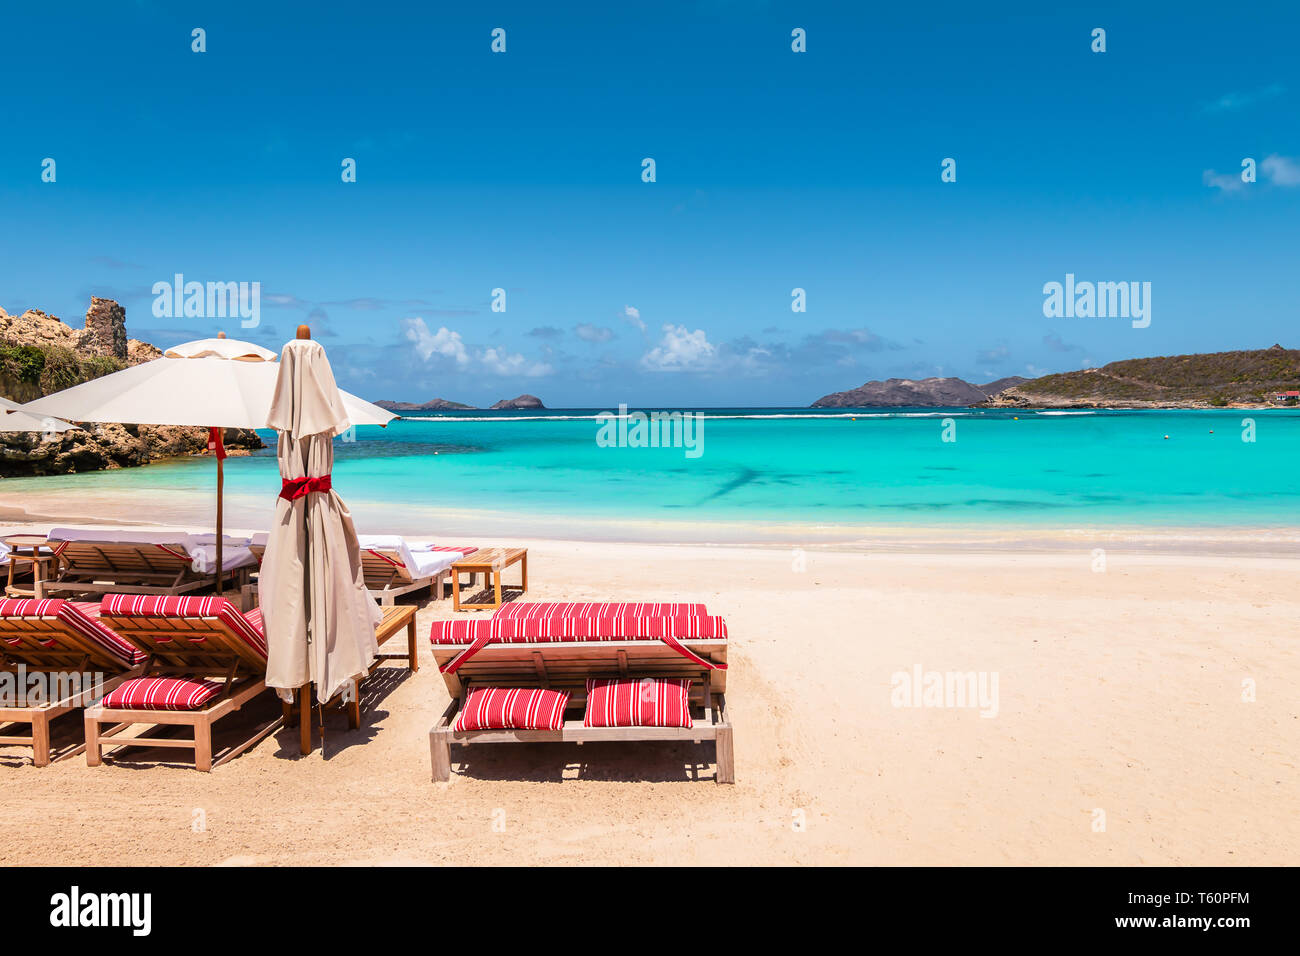 Beach chairs and umbrella on tropical beach. Summer vacation and relaxation background. Stock Photo